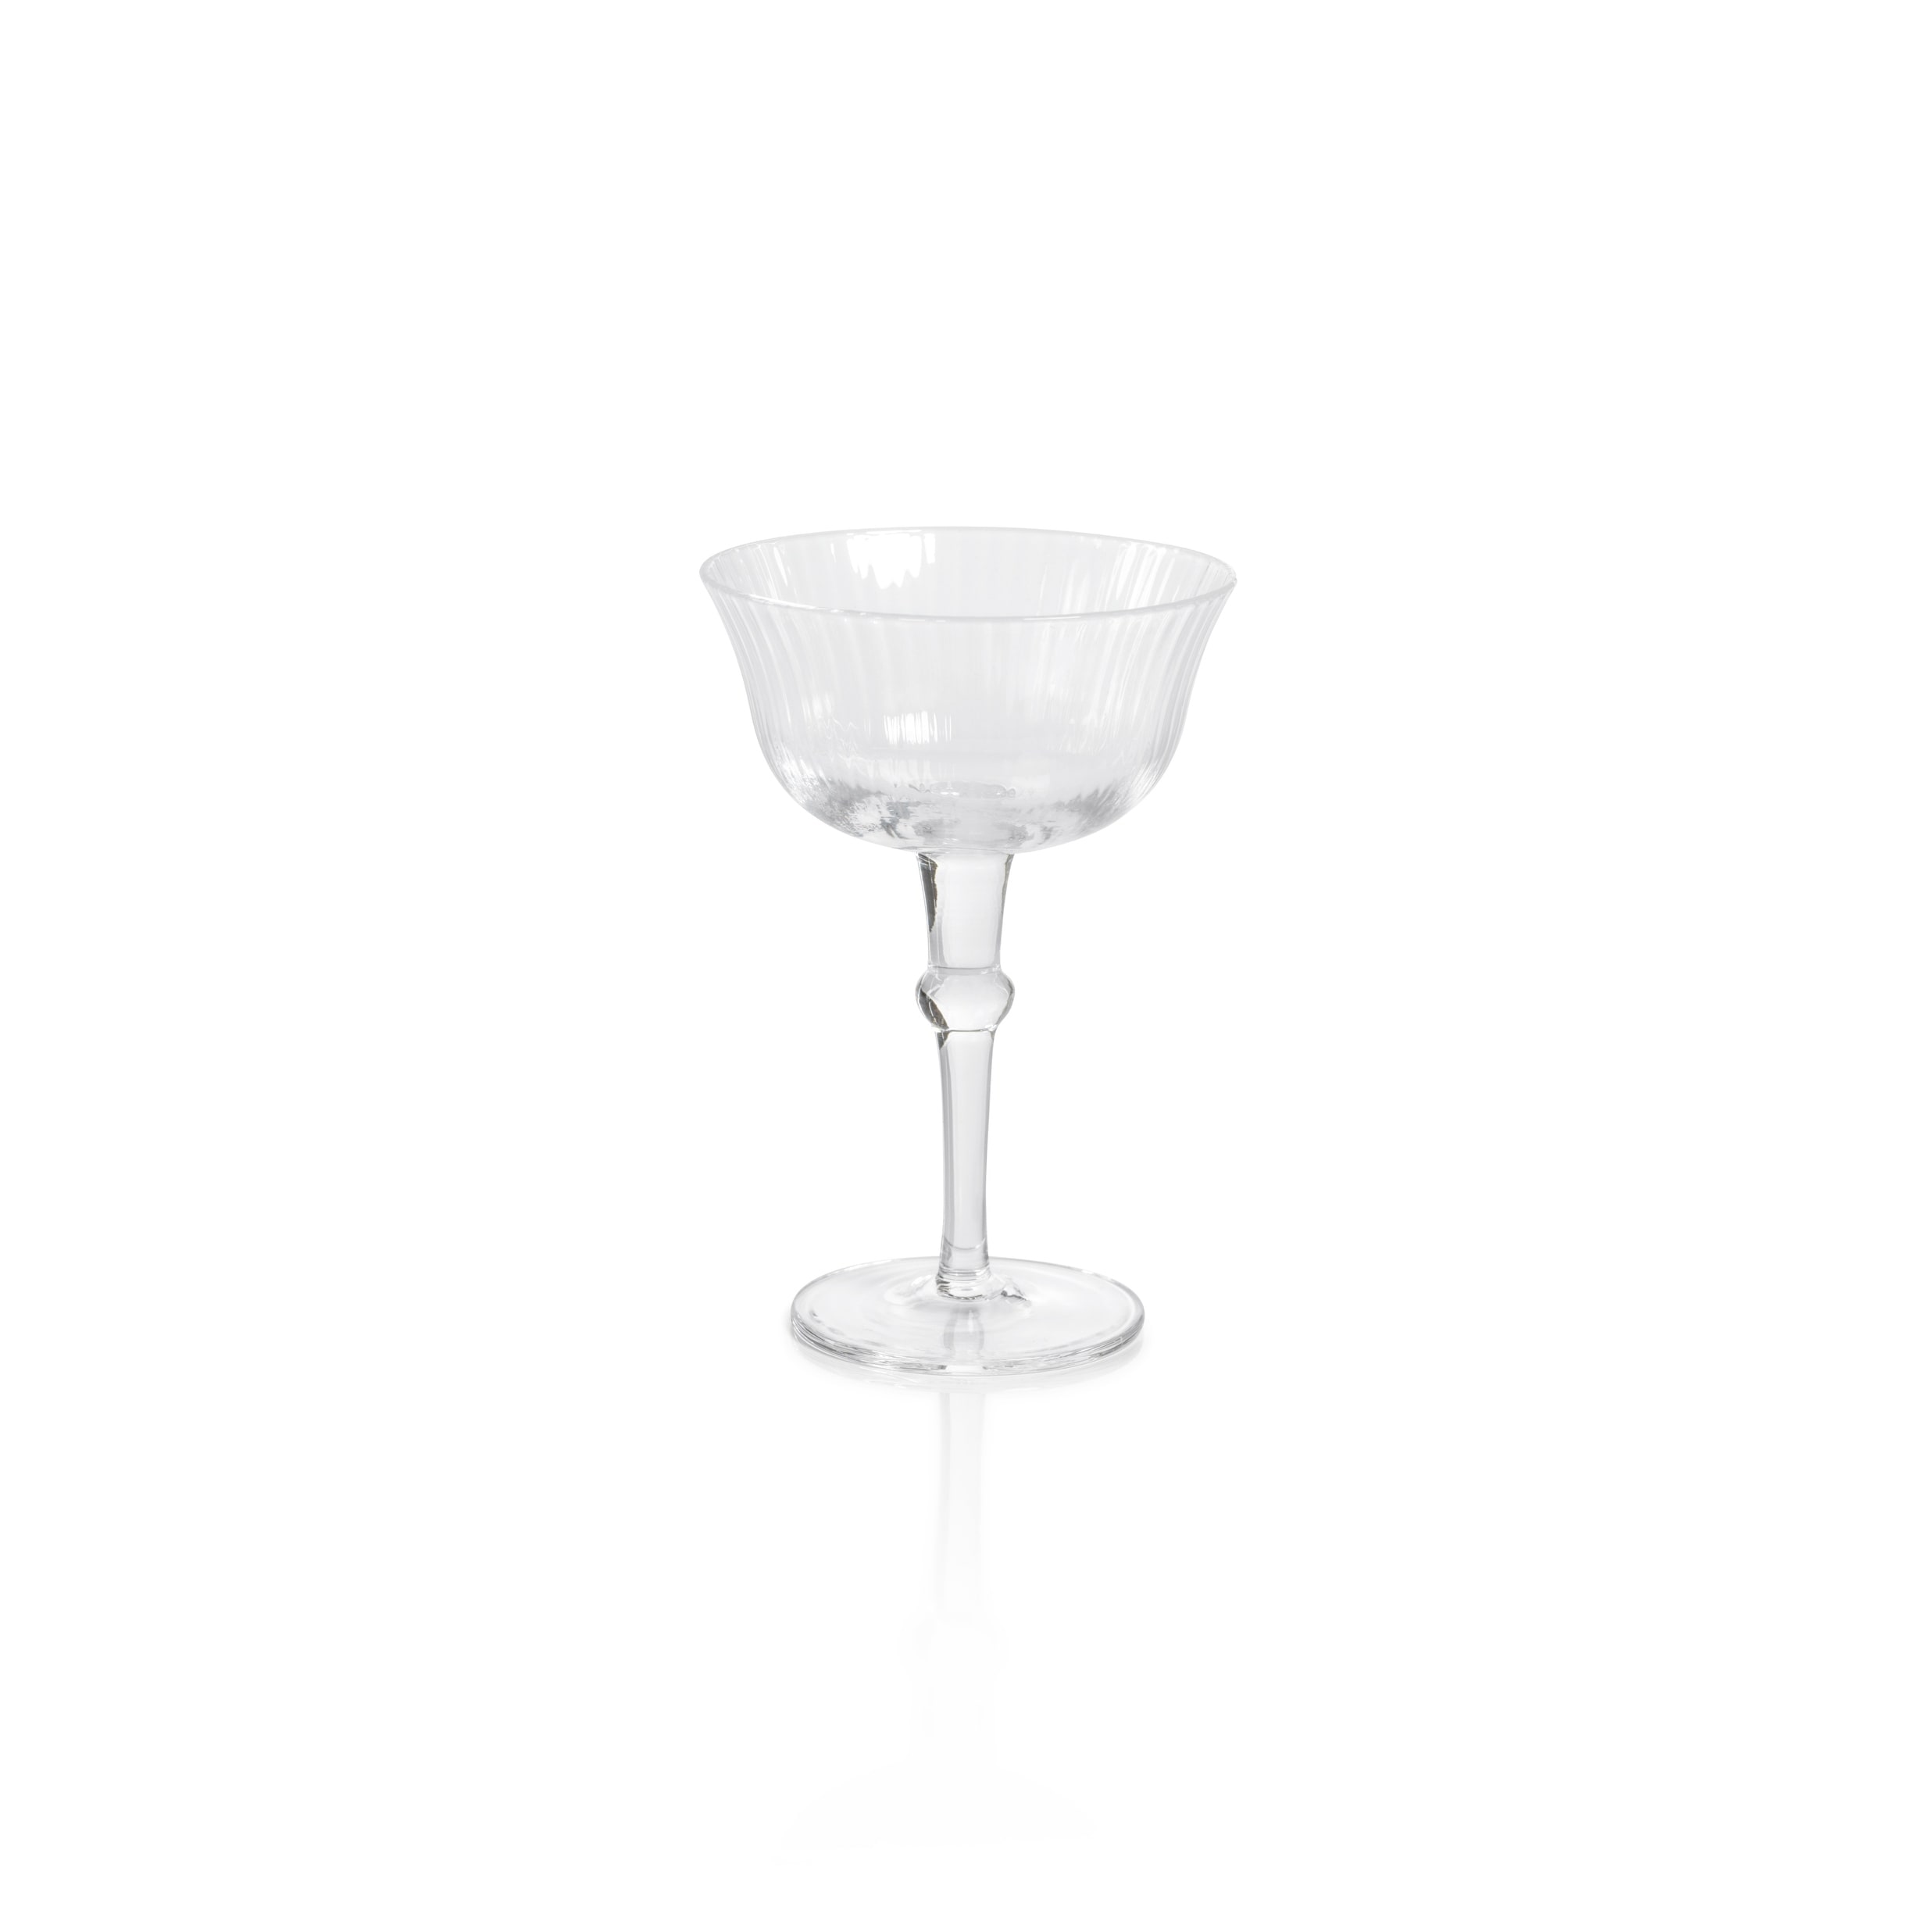 https://ak1.ostkcdn.com/images/products/is/images/direct/5d8fd62c6cefaee48041f2b51765612a82b61162/Kenley-Clear-Optic-Martini-Glasses%2C-Set-of-4.jpg